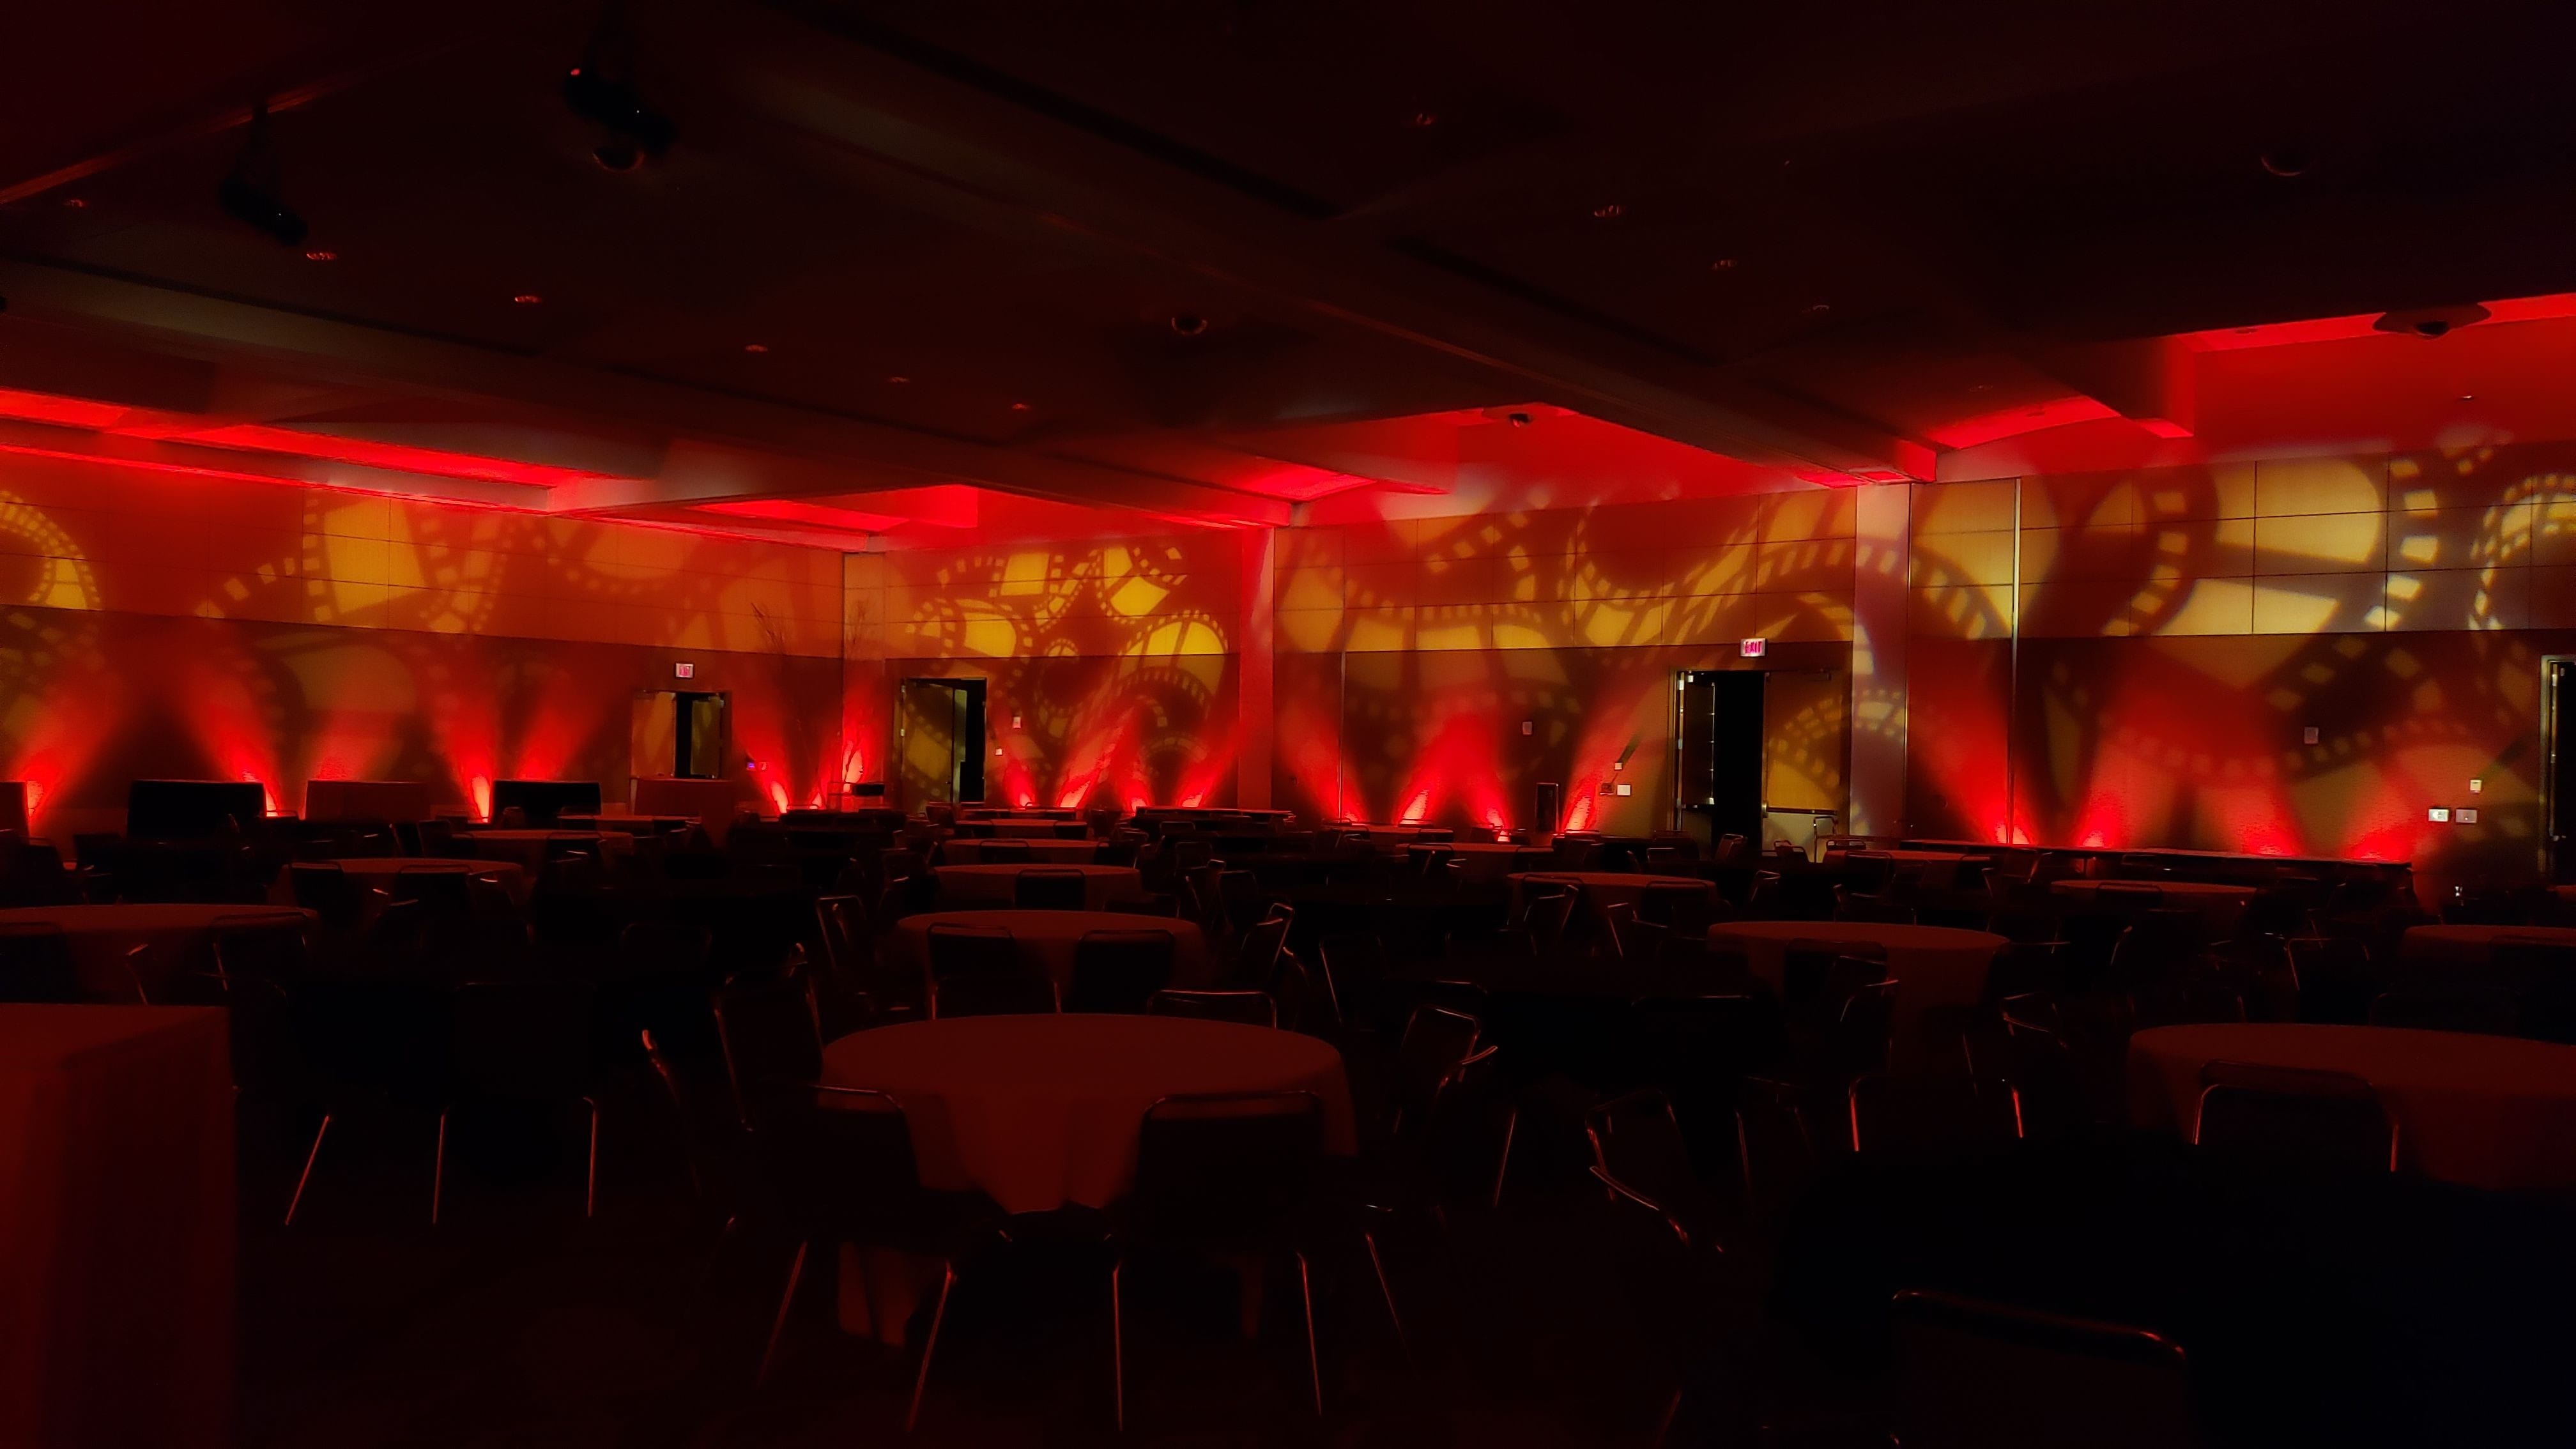 DECC, Harbor Side Ballroom.
Angled red up lighting with movie reel gobos on the walls.